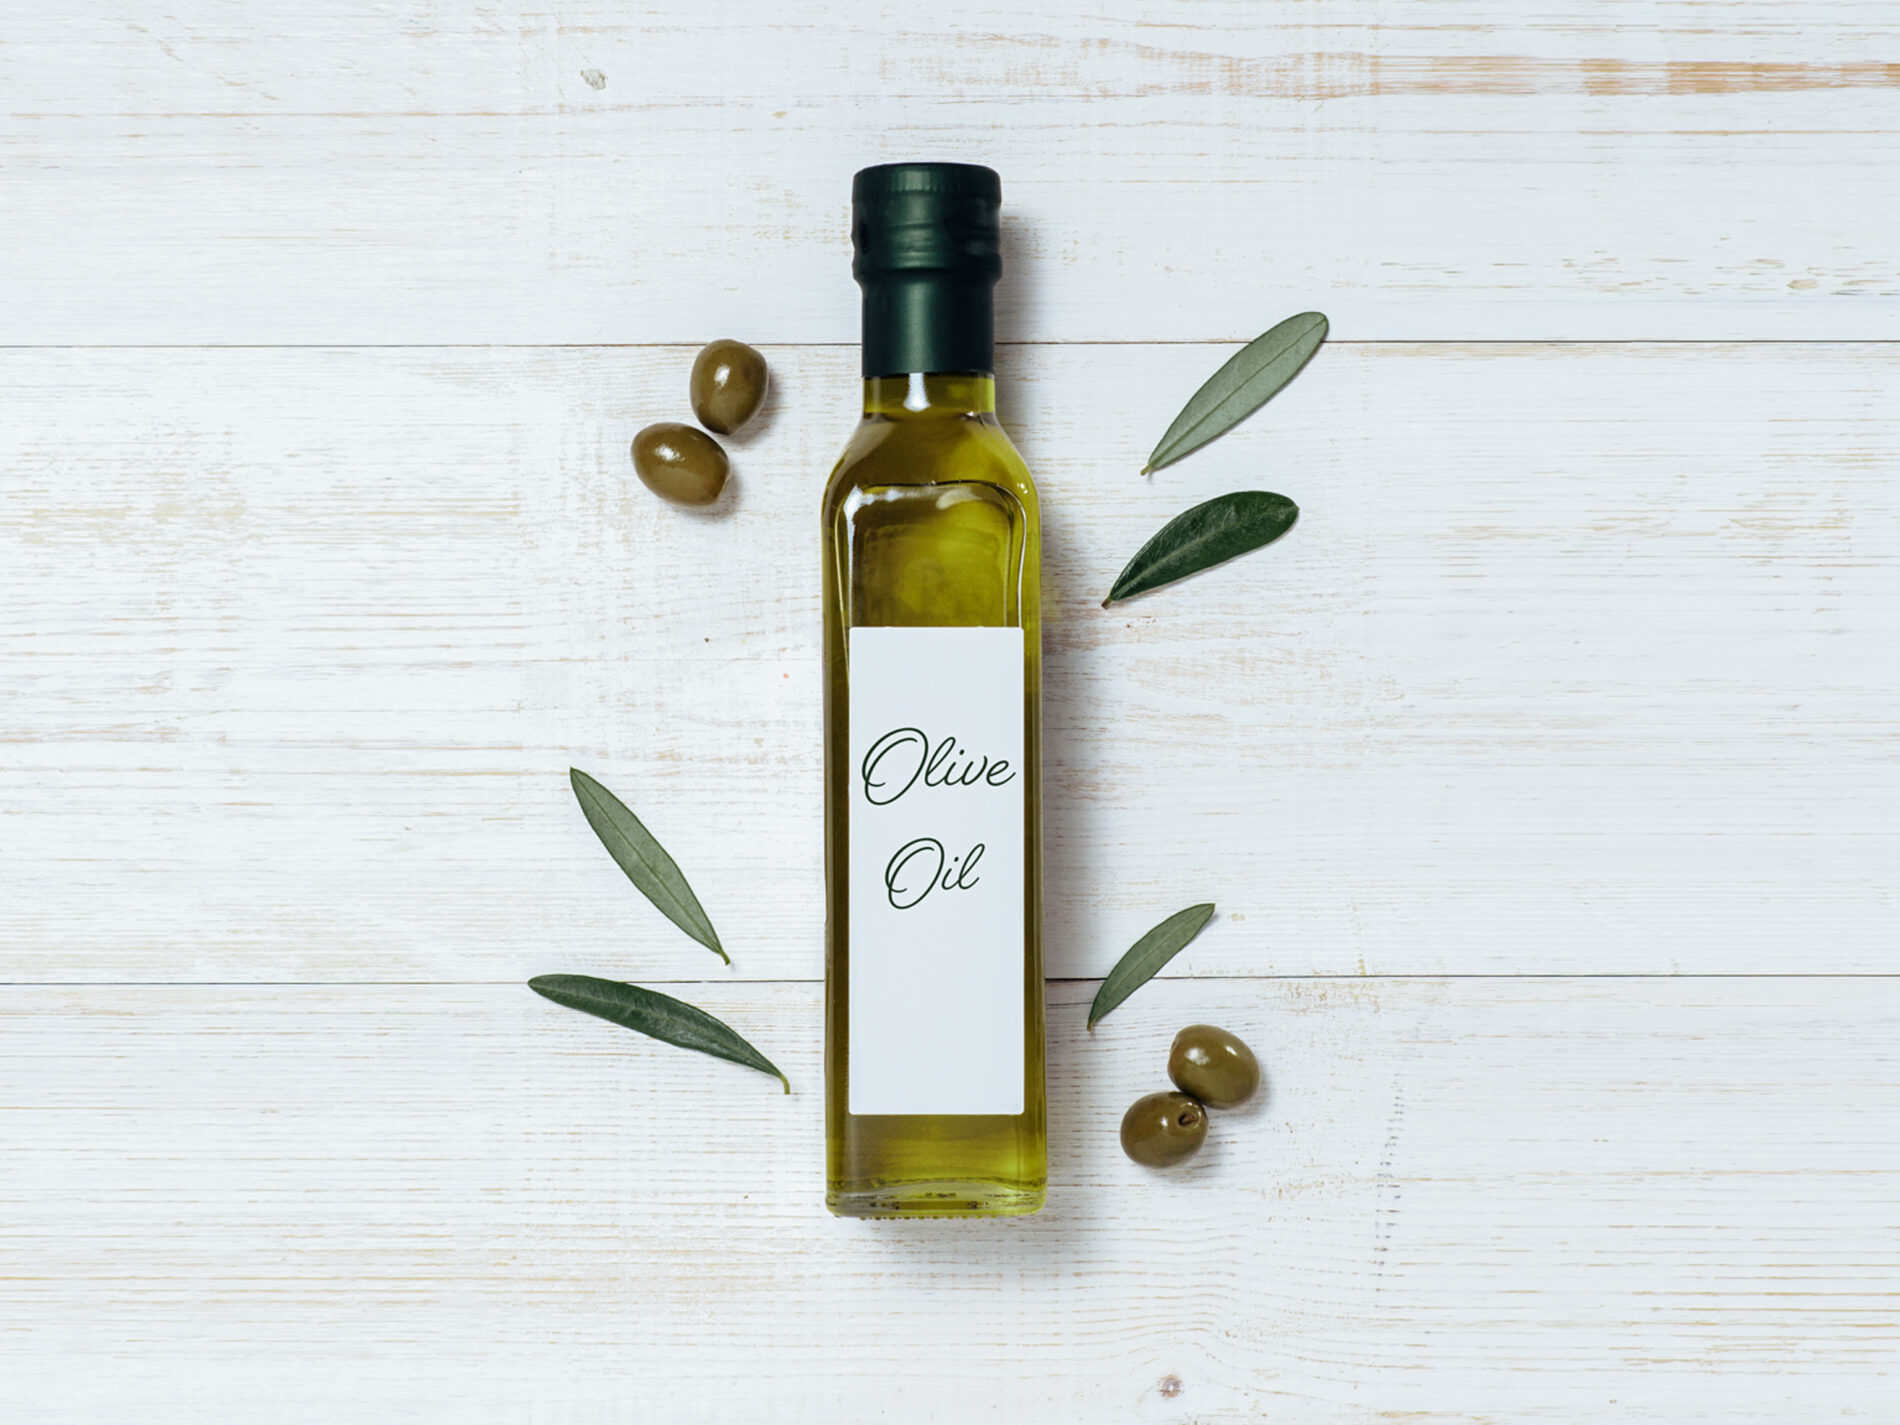 A bottle of olive oil with olive leaves and olives on white background